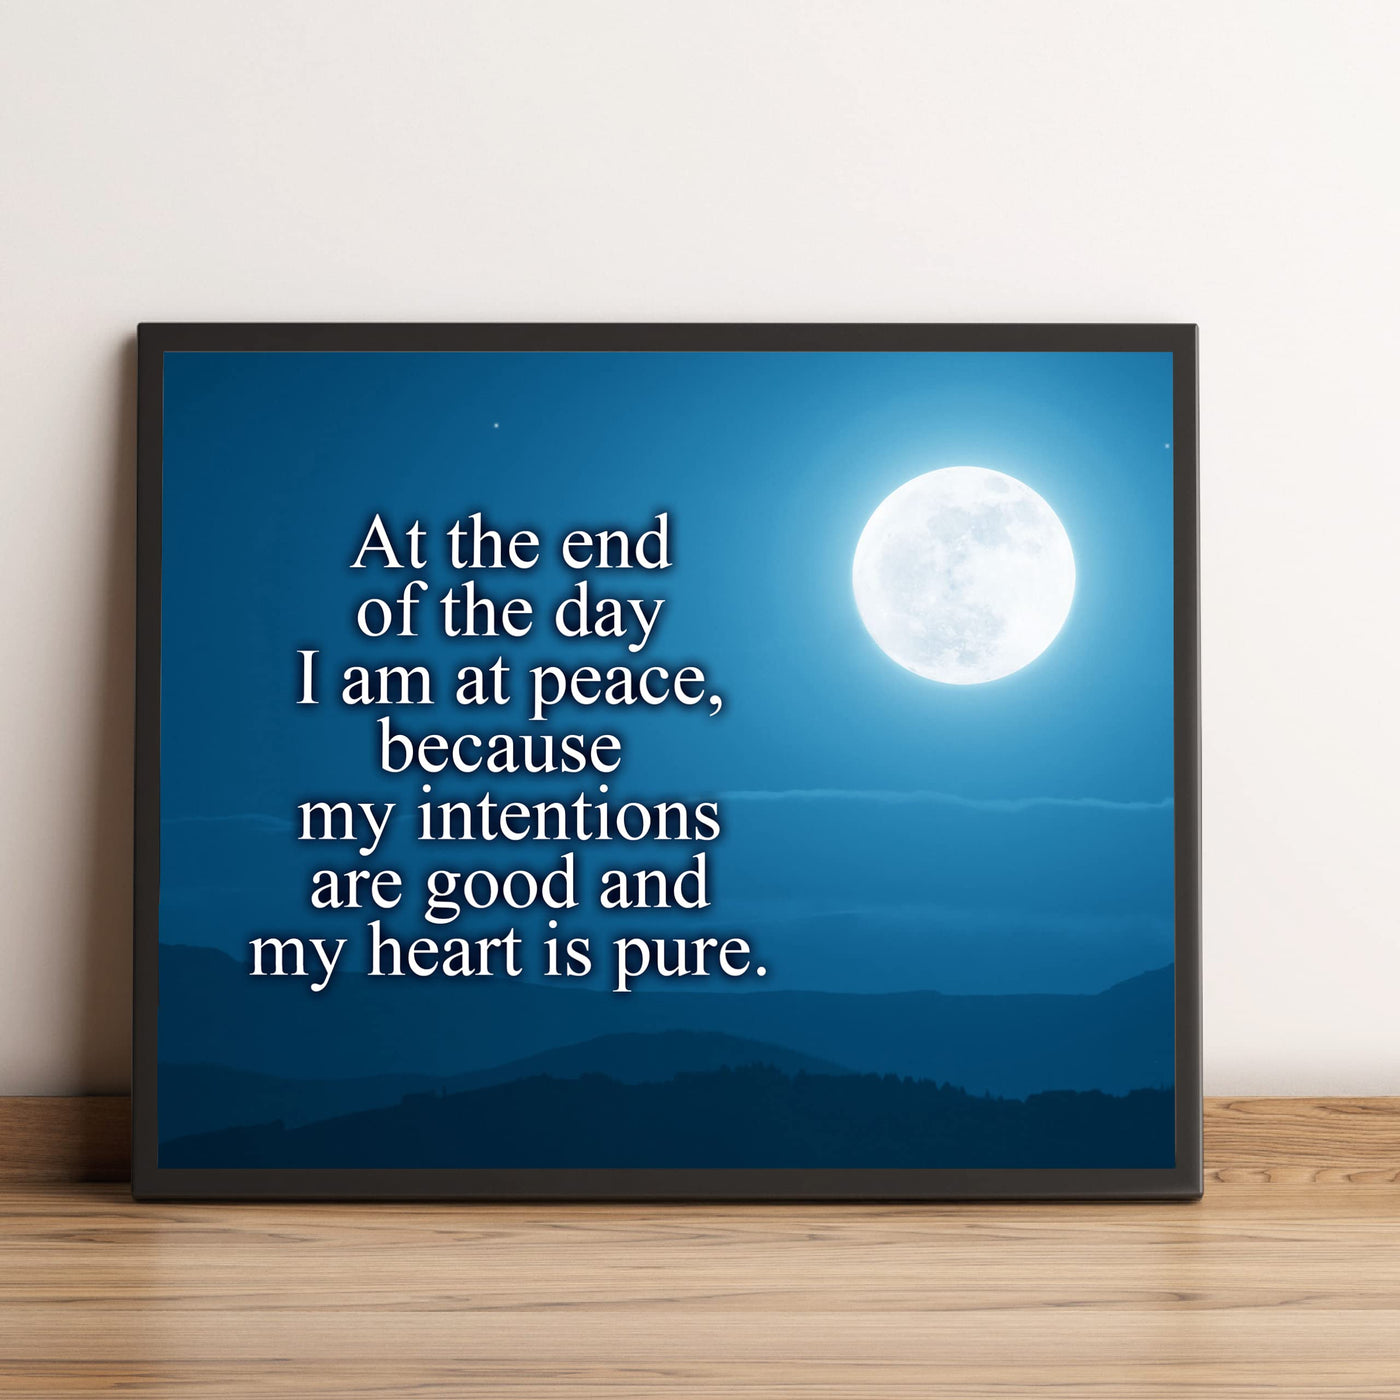 At the End of the Day, I Am At Peace Inspirational Quotes Wall Art Decor -10 x 8" Starry Night Print w/Full Moon Image-Ready to Frame. Positive Home-Office Decor. Great Reminder-Keep Heart Pure!